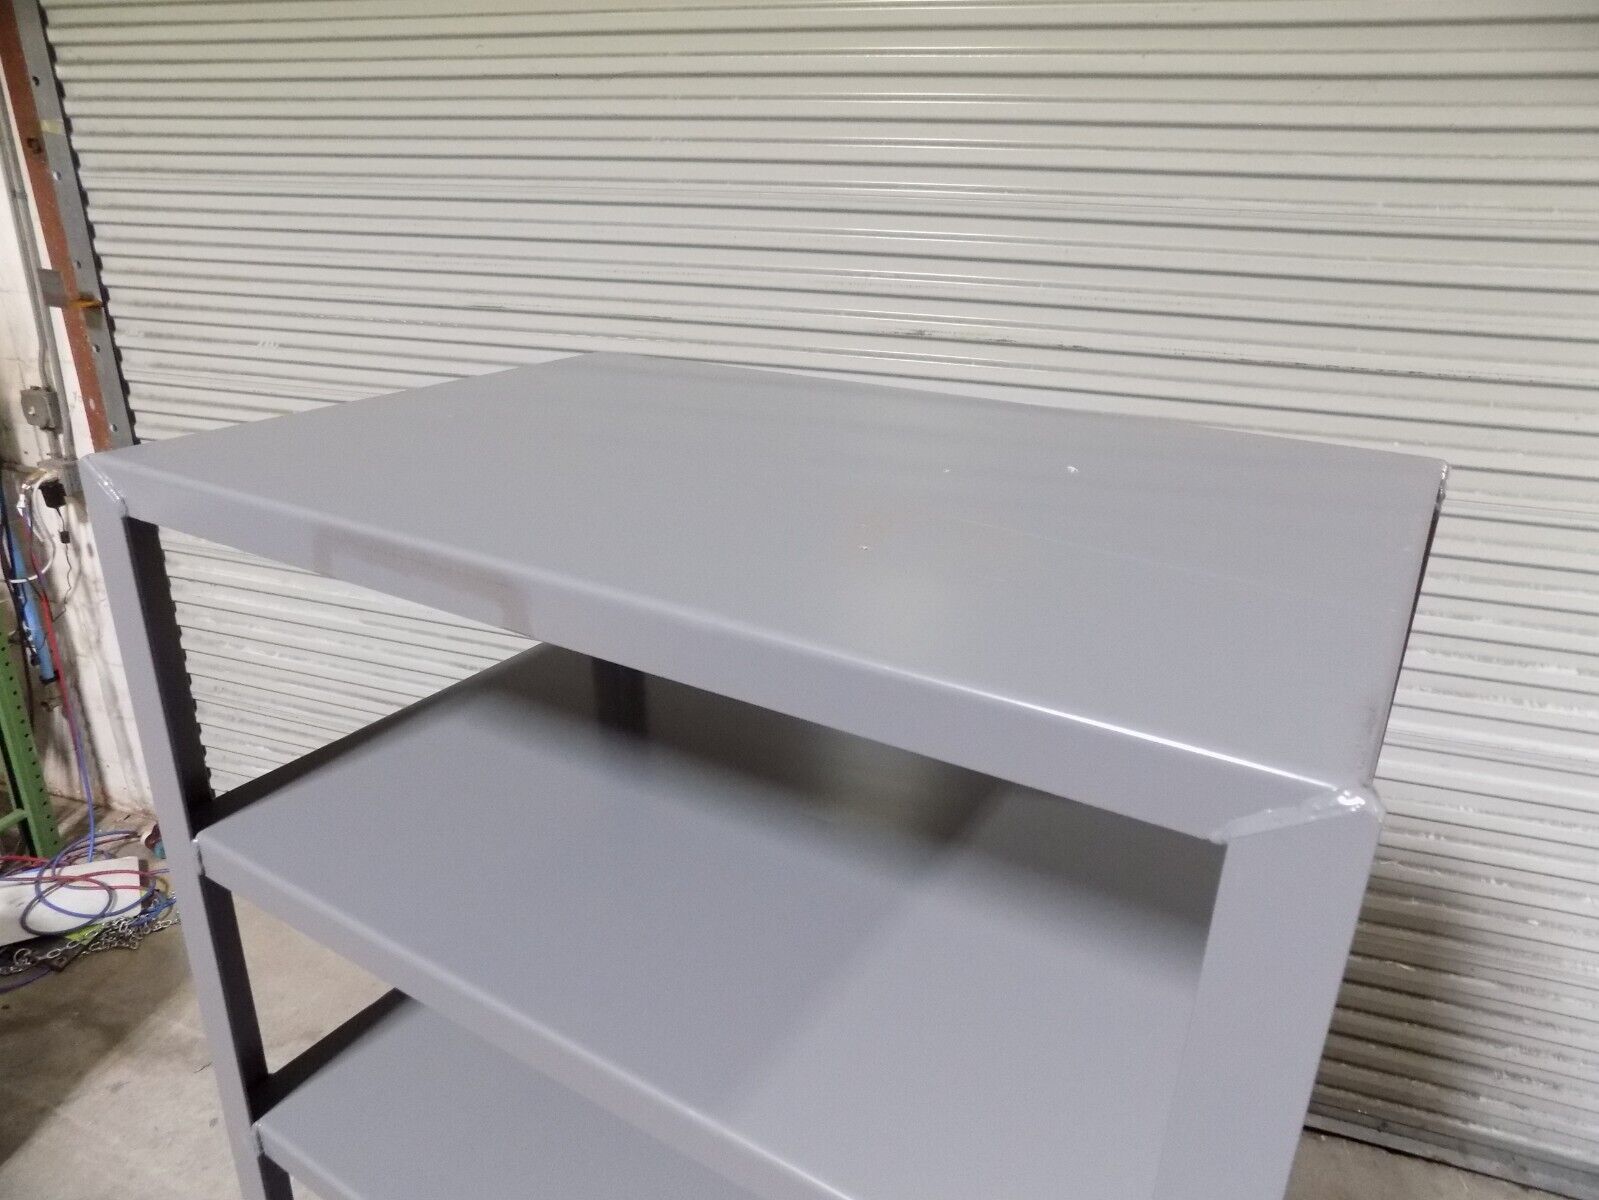 Solid Stainless Steel Shelving - 36 x 24 x 72